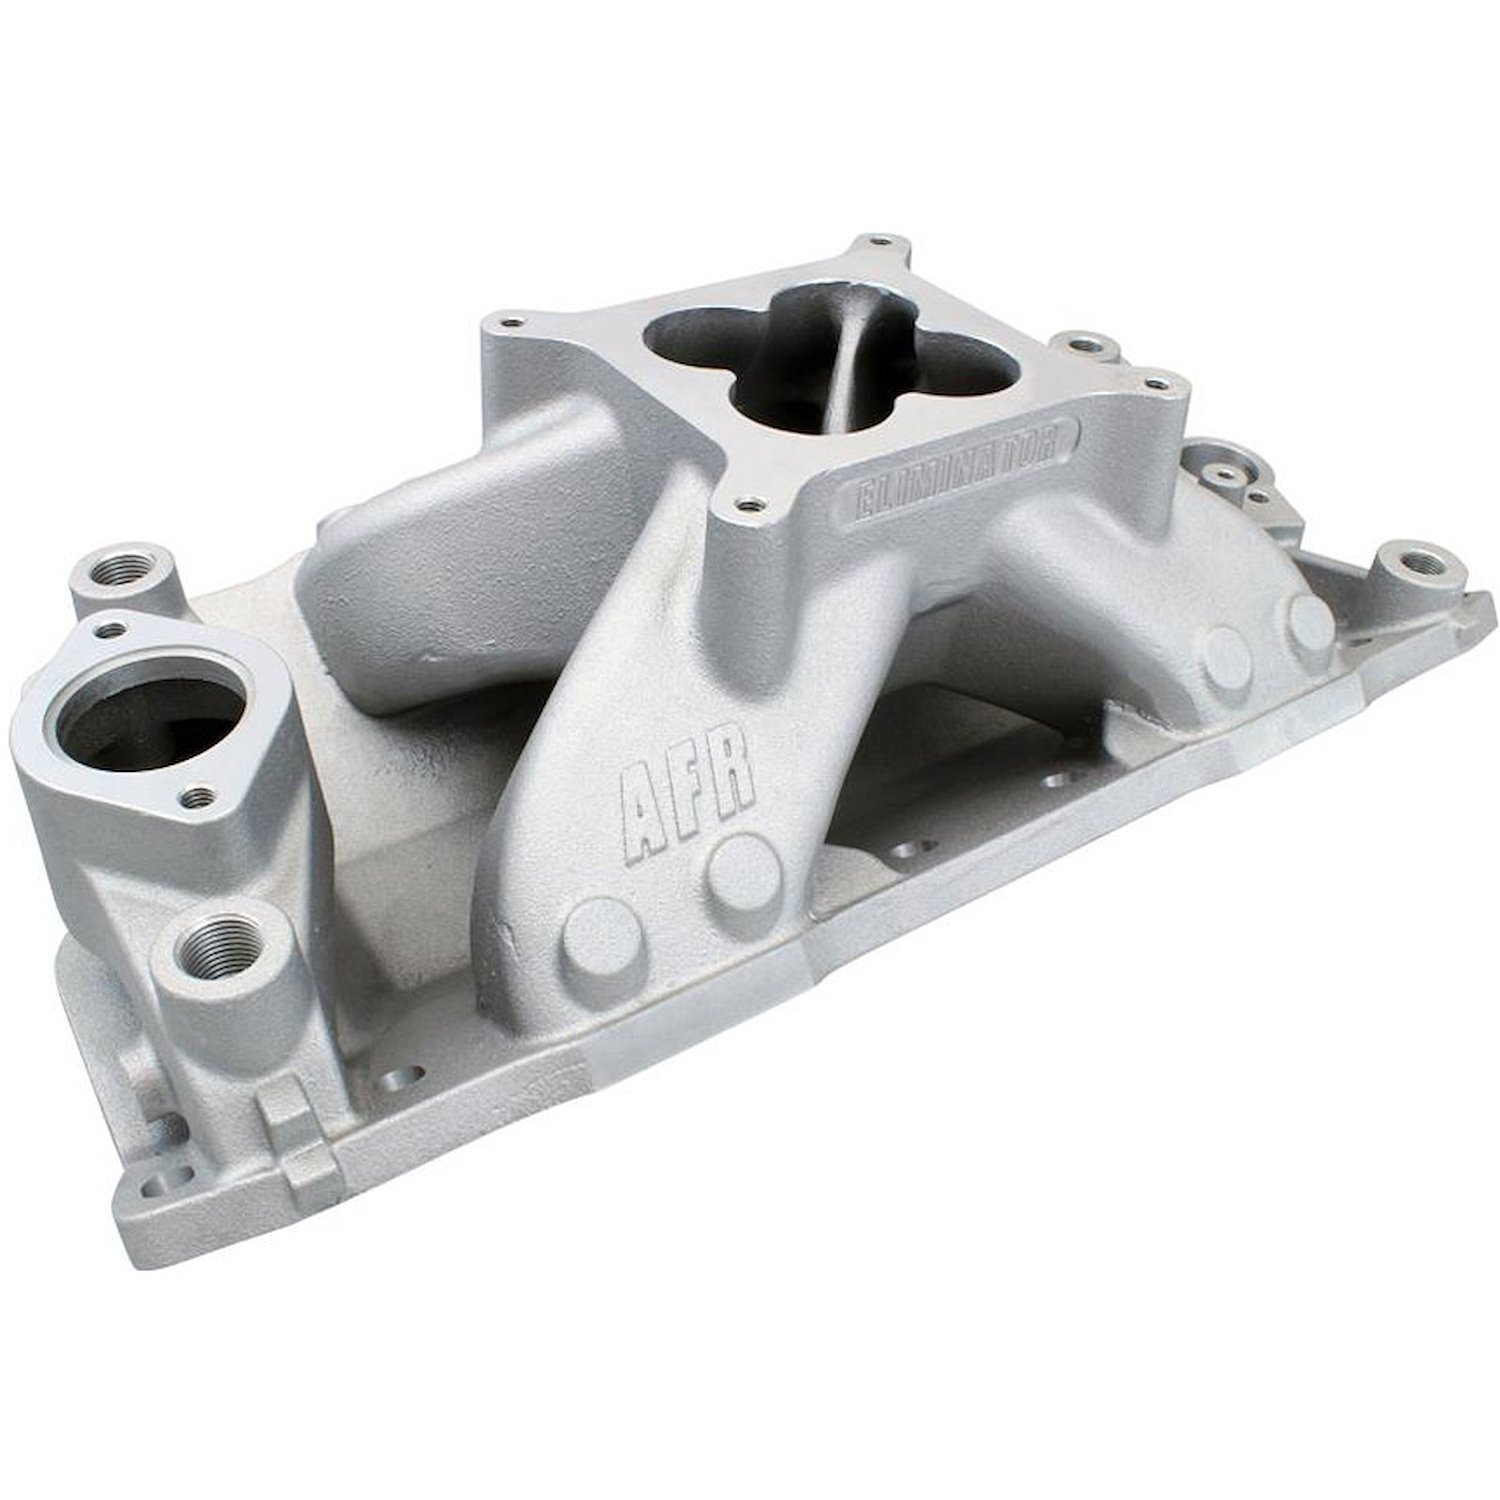 4811 Eliminator Intake Manifold for Small Block Chevy [4150 Flange]